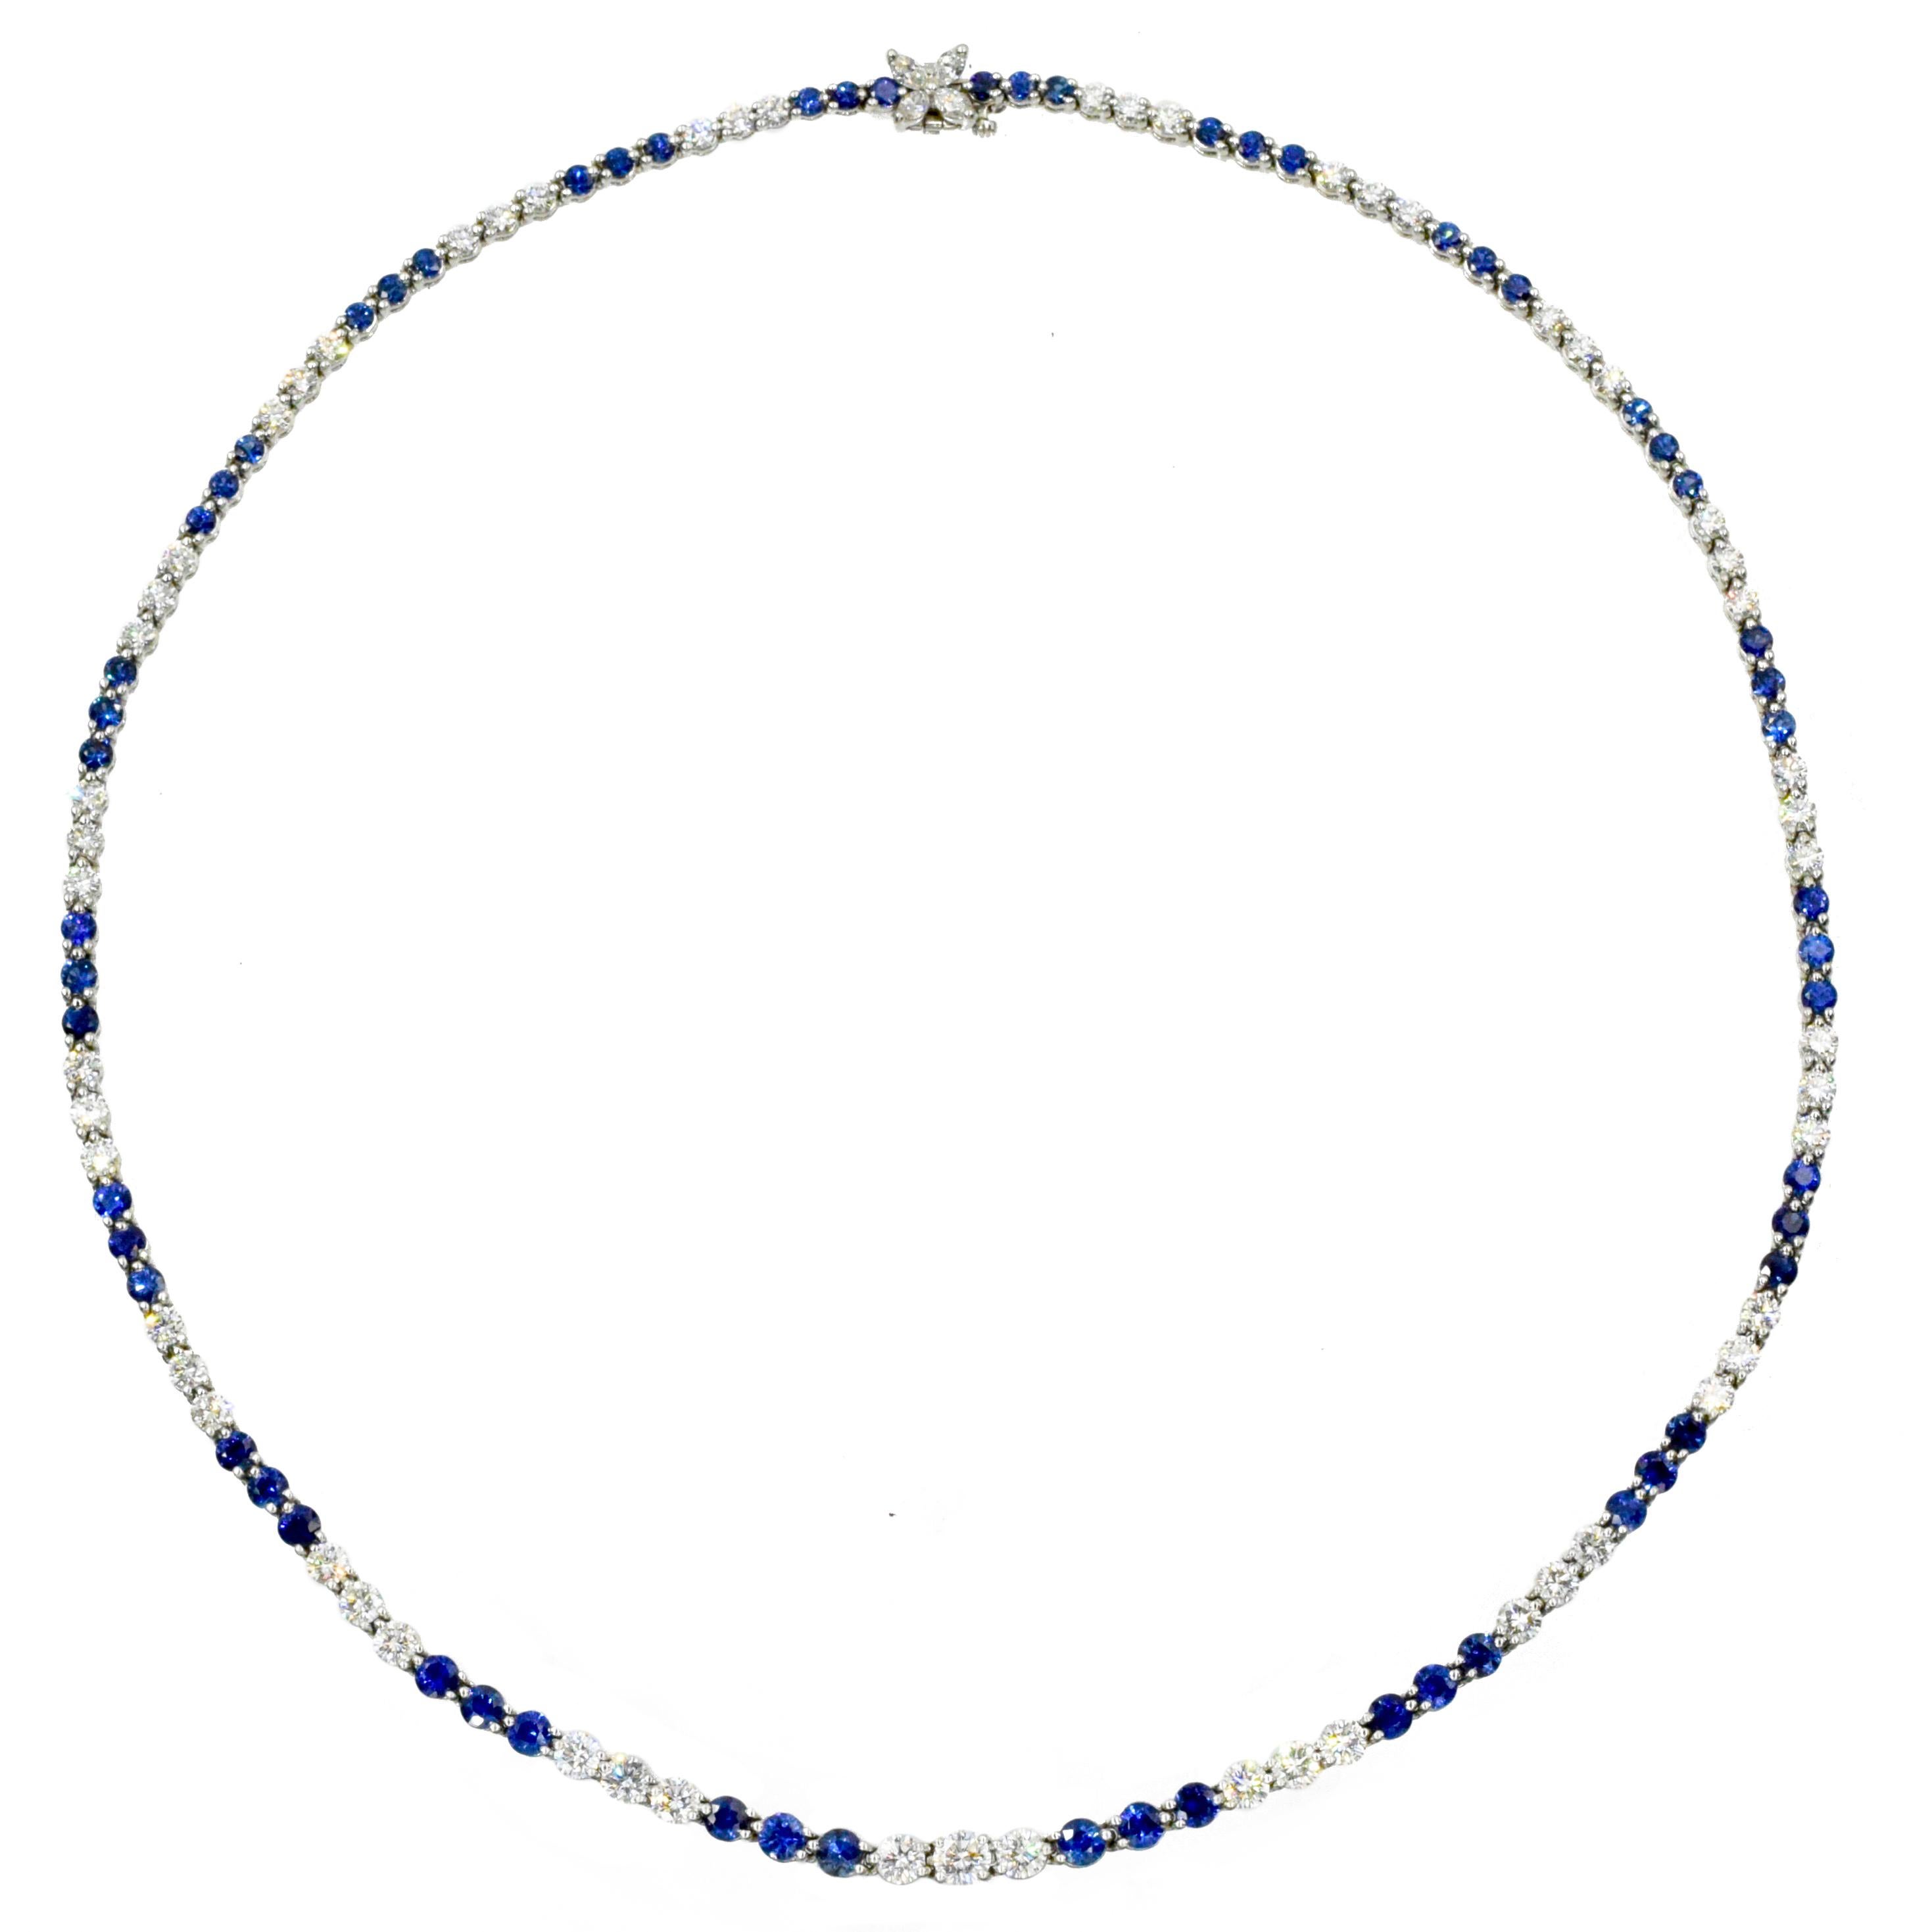 Elegant Tiffany and Co Diamond & Sapphire Necklace!
Round shape 60 sapphires with total weight of 6.45 carats alternating with 57 fine quality brilliant shape diamonds  with 5.40 carats. 
The clasp has 4 marque shape diamonds with 0.60